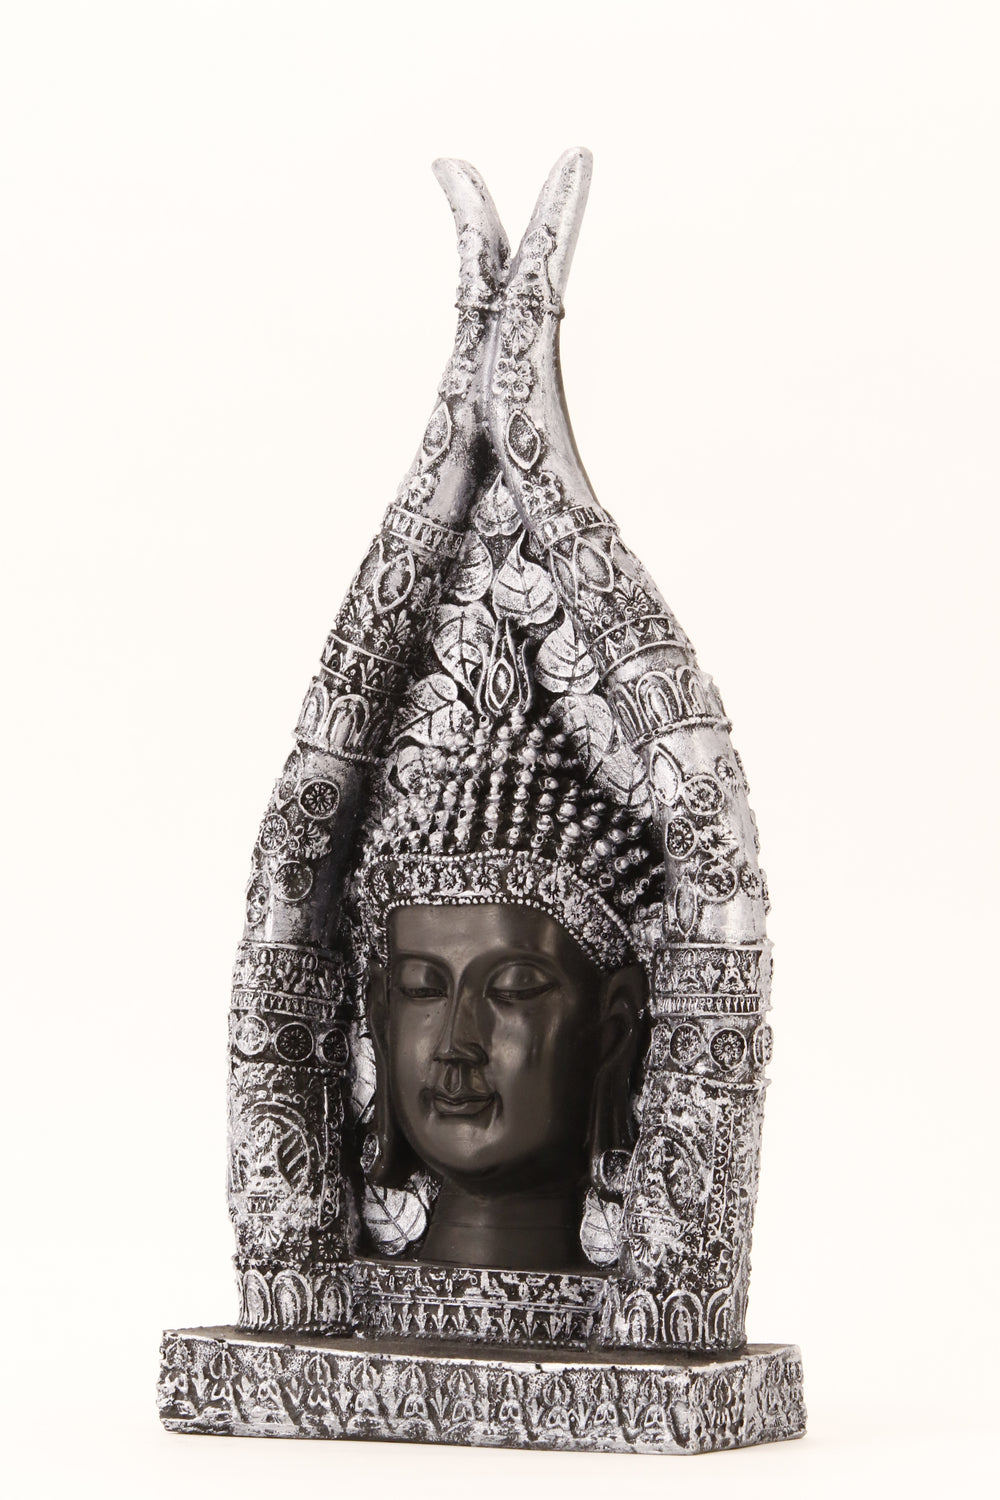 BUDDHA BUST SILVER ACCENT STATUE SIDE VIEW